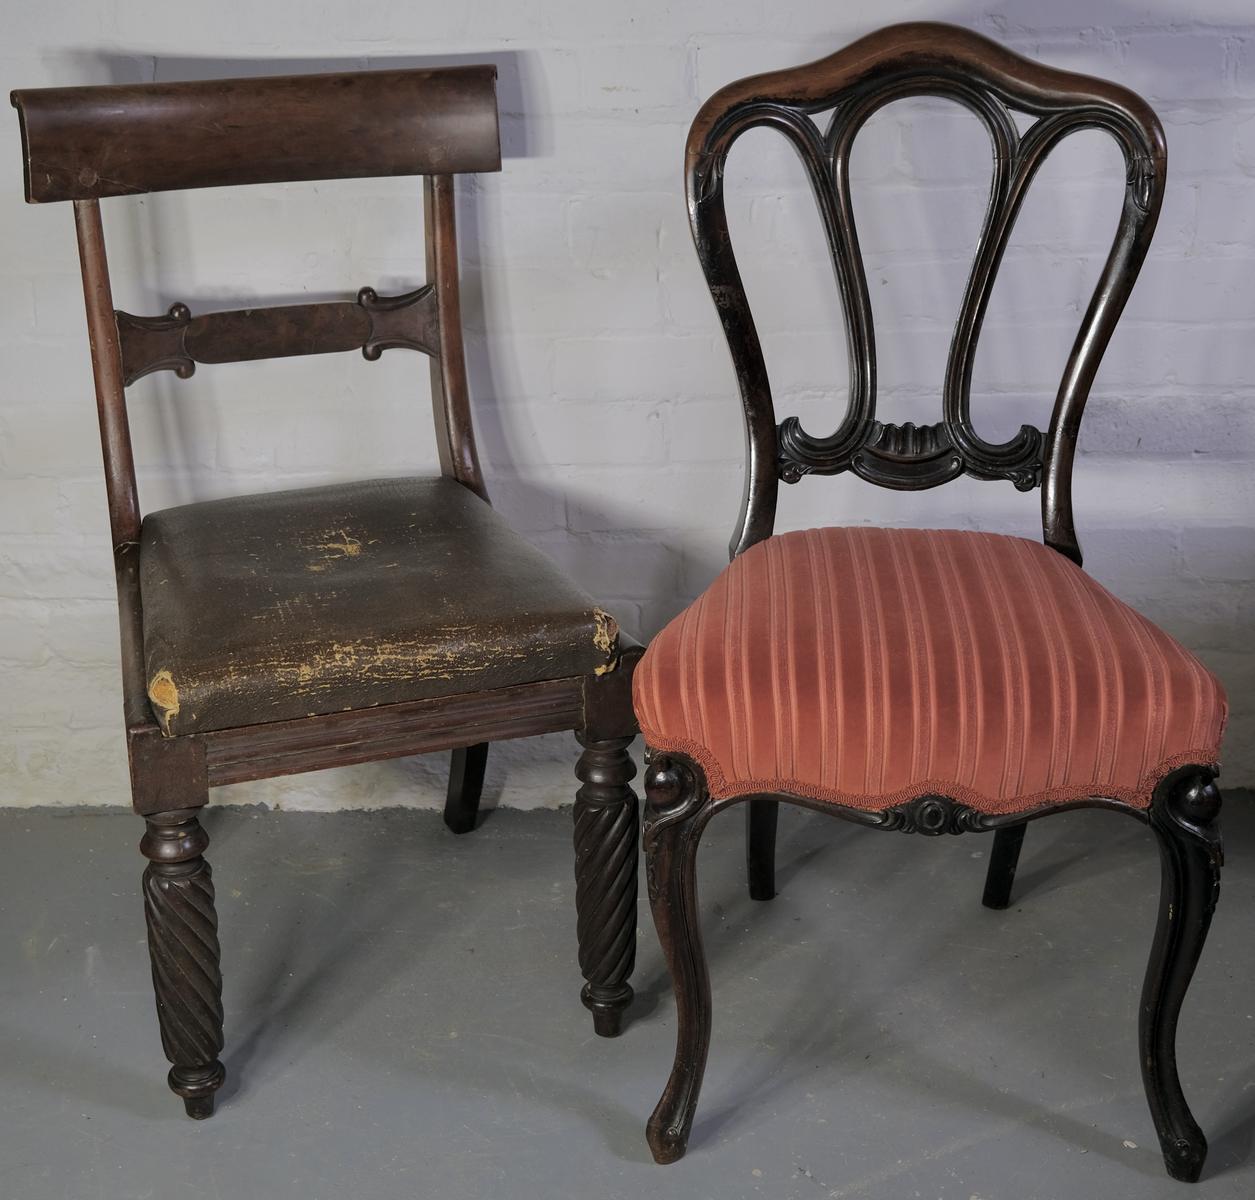 ANTIQUE SIDE CHAIRS